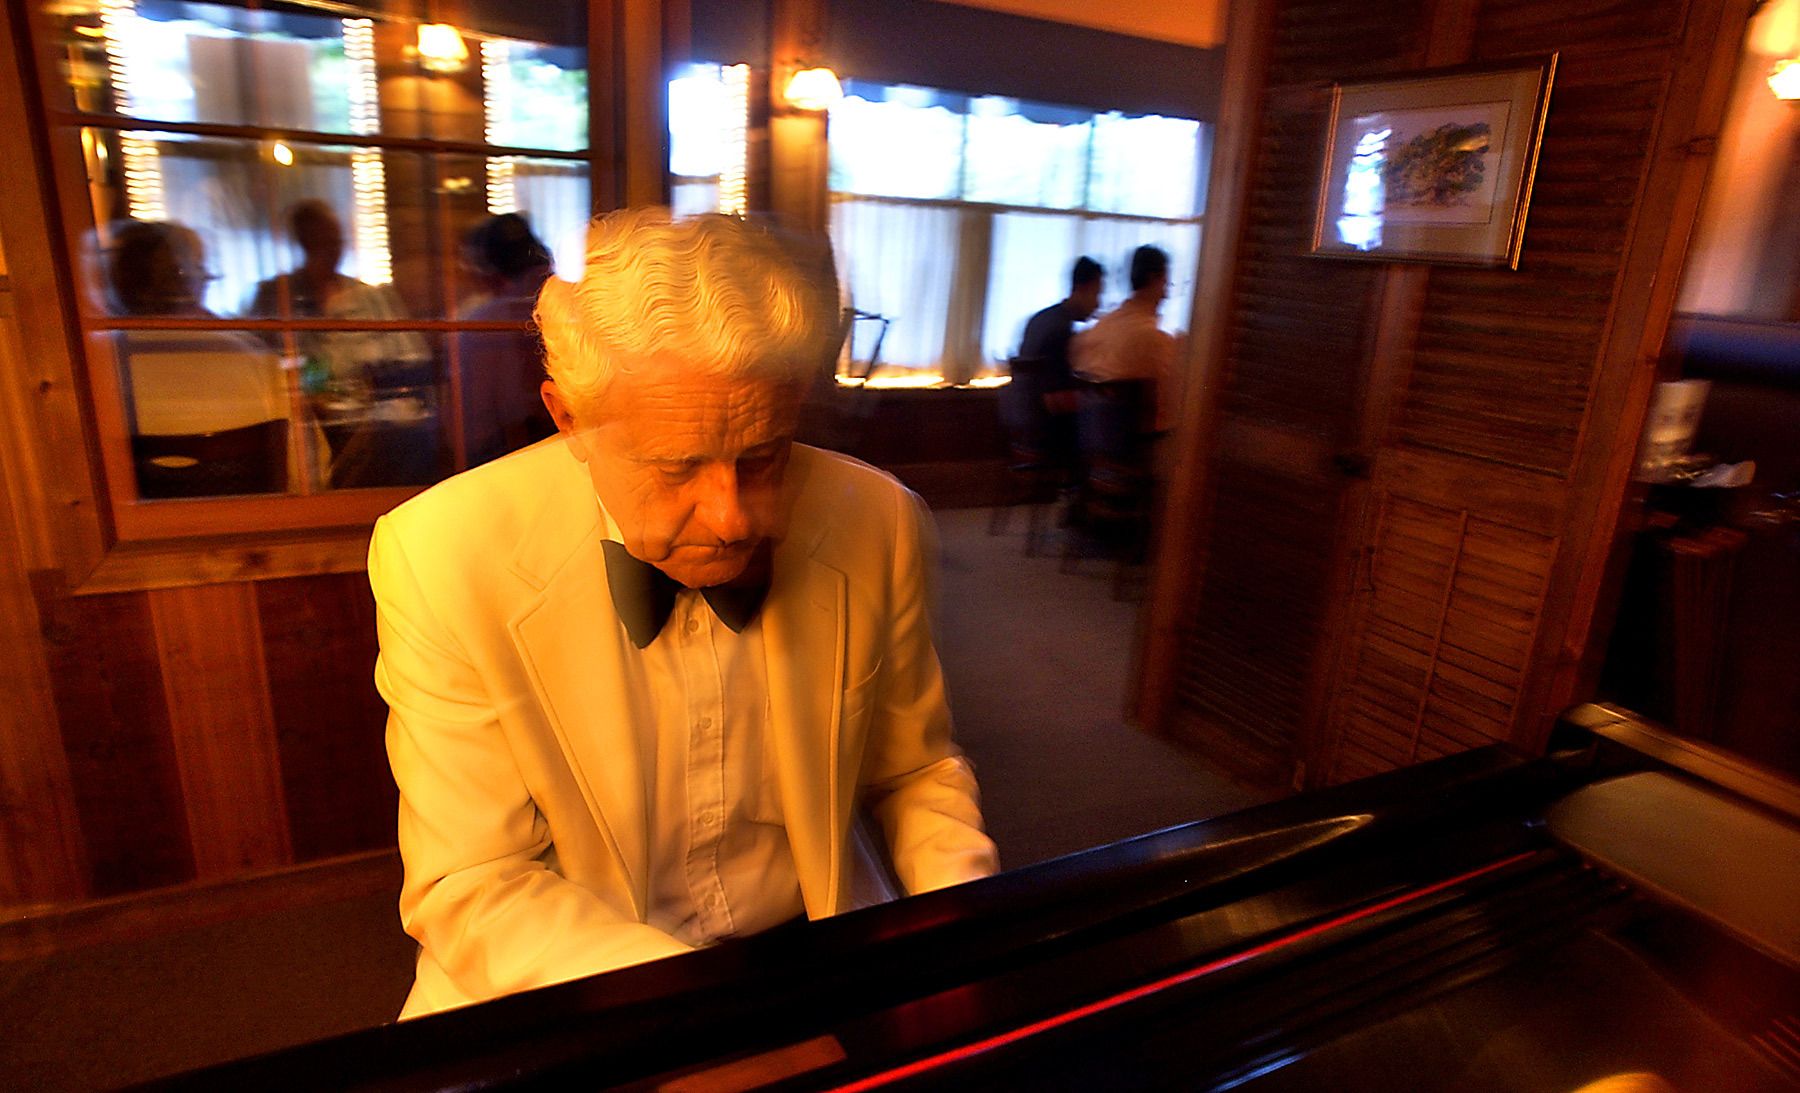 Classic jazz pianist Bob Hutchings  plays standards at The Charleston Cafe in Surfside Beach.